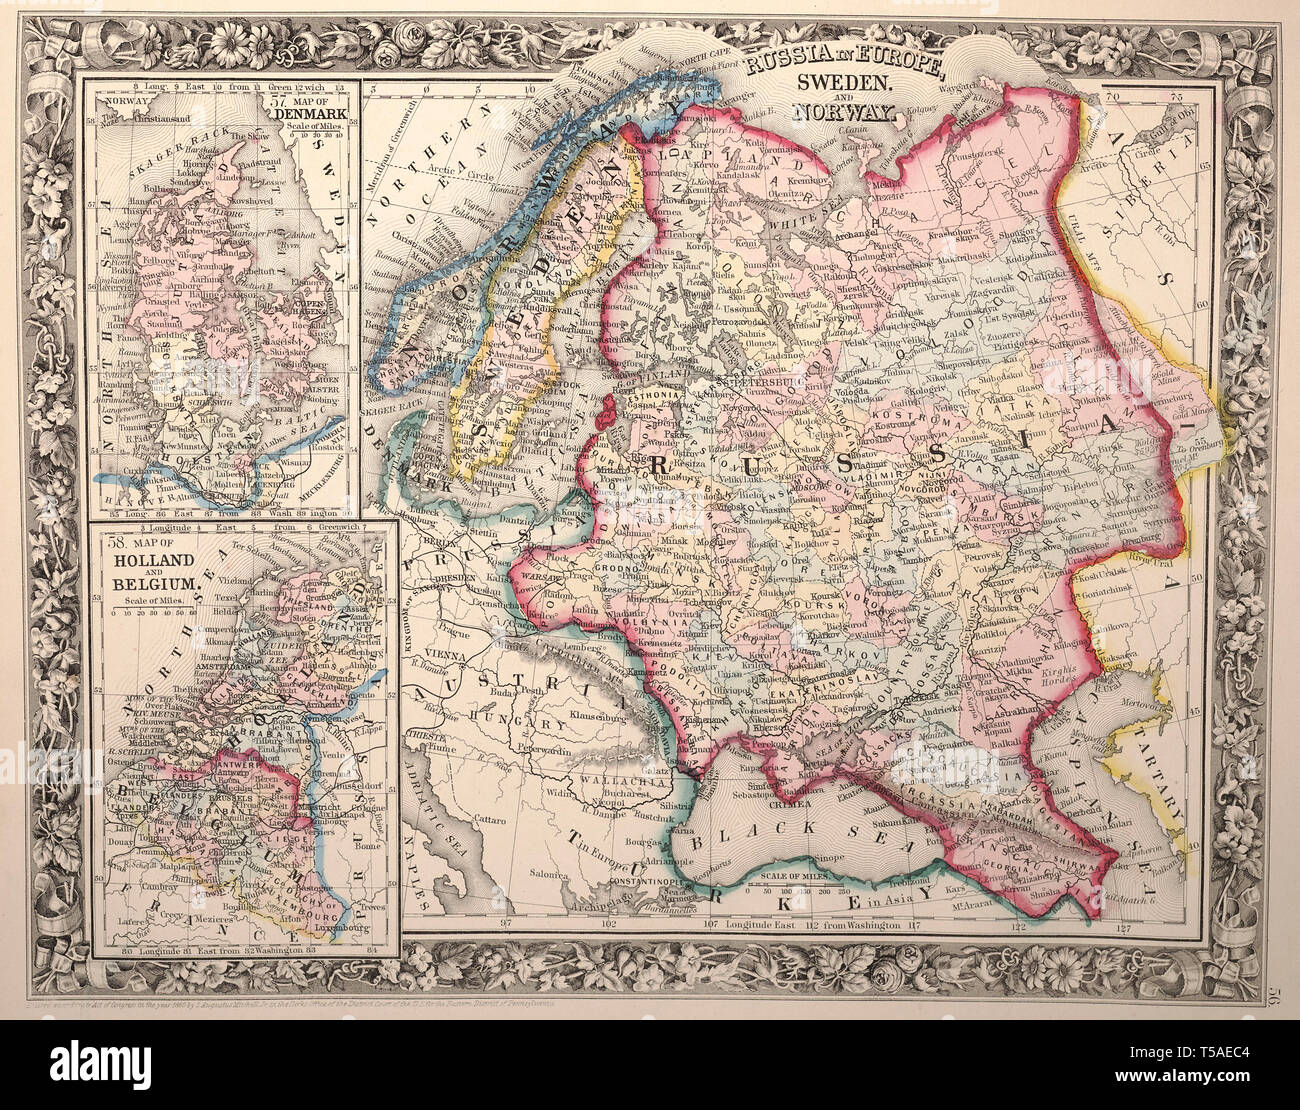 Beautiful vintage hand drawn map illustrations of Russia and Norway from old book. Can be used as poster or decorative element for interior design. Stock Photo